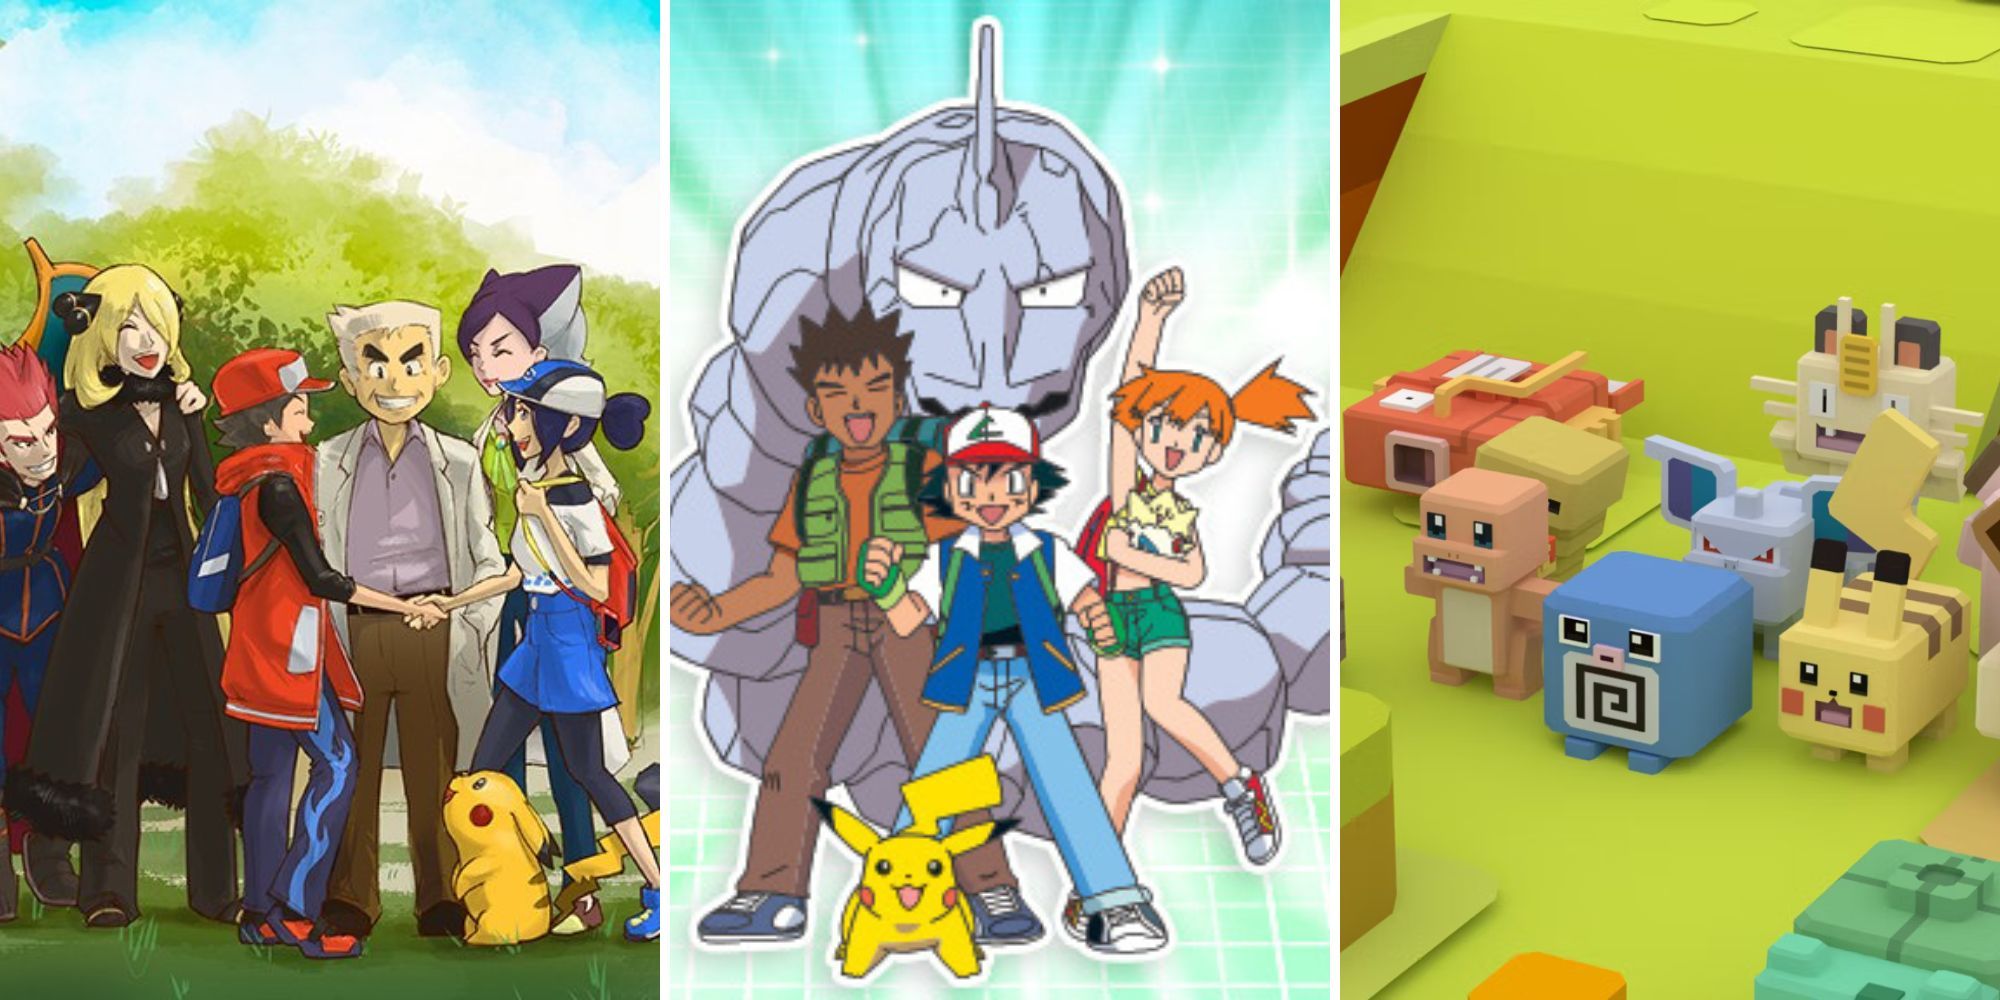 A group of Pokemon Trainers gather in a park- Ash- Brock- and Misty pose with Pikachu and Onix- Cube-shaped Pokemon gather at the bottom of a hill